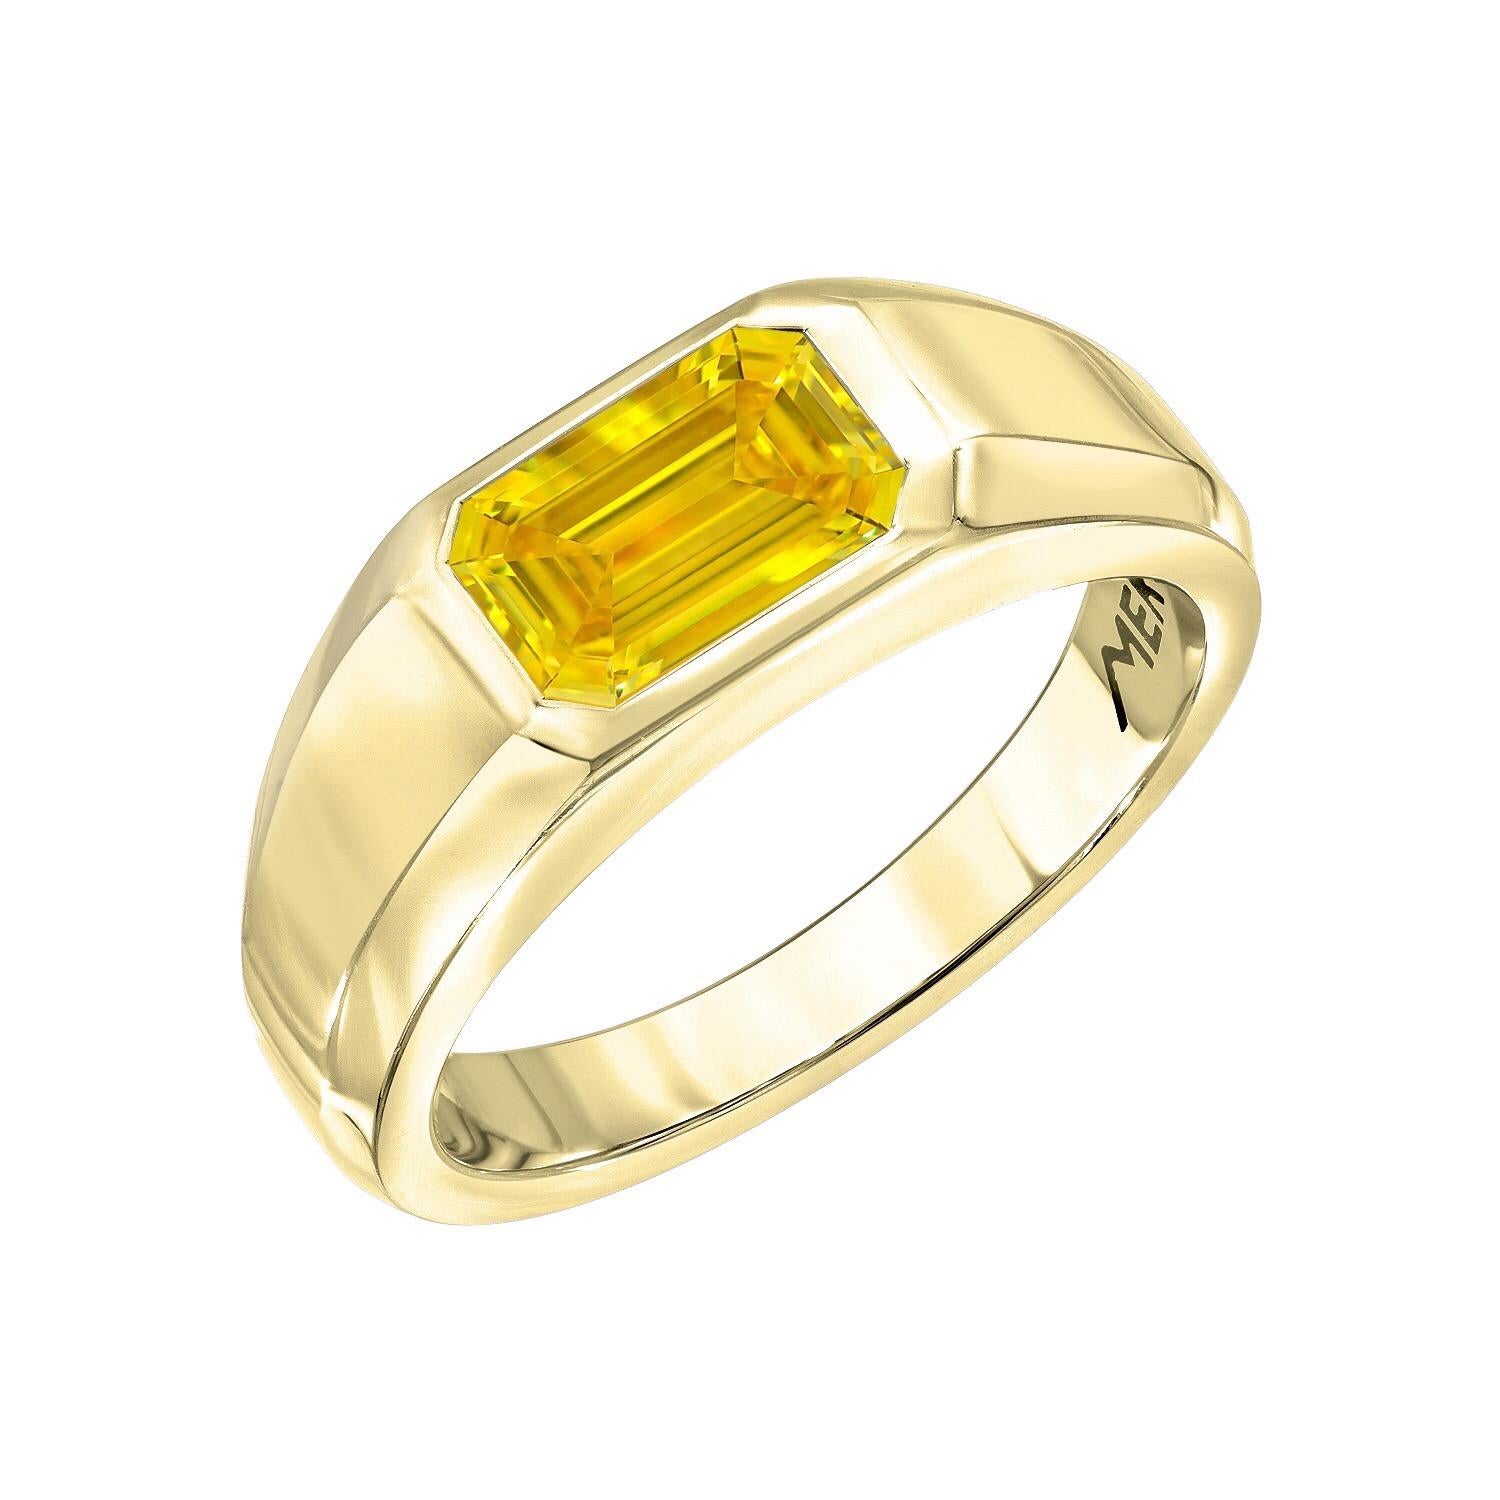 Emerald cut yellow diamond ring, featuring a GIA certified 1.04 carat Fancy Vivid Yellow, VS1 clarity, emerald cut diamond, set in a supreme hand crafted 18K yellow gold unisex ring.
The G.I.A certificate is attached to the images for your